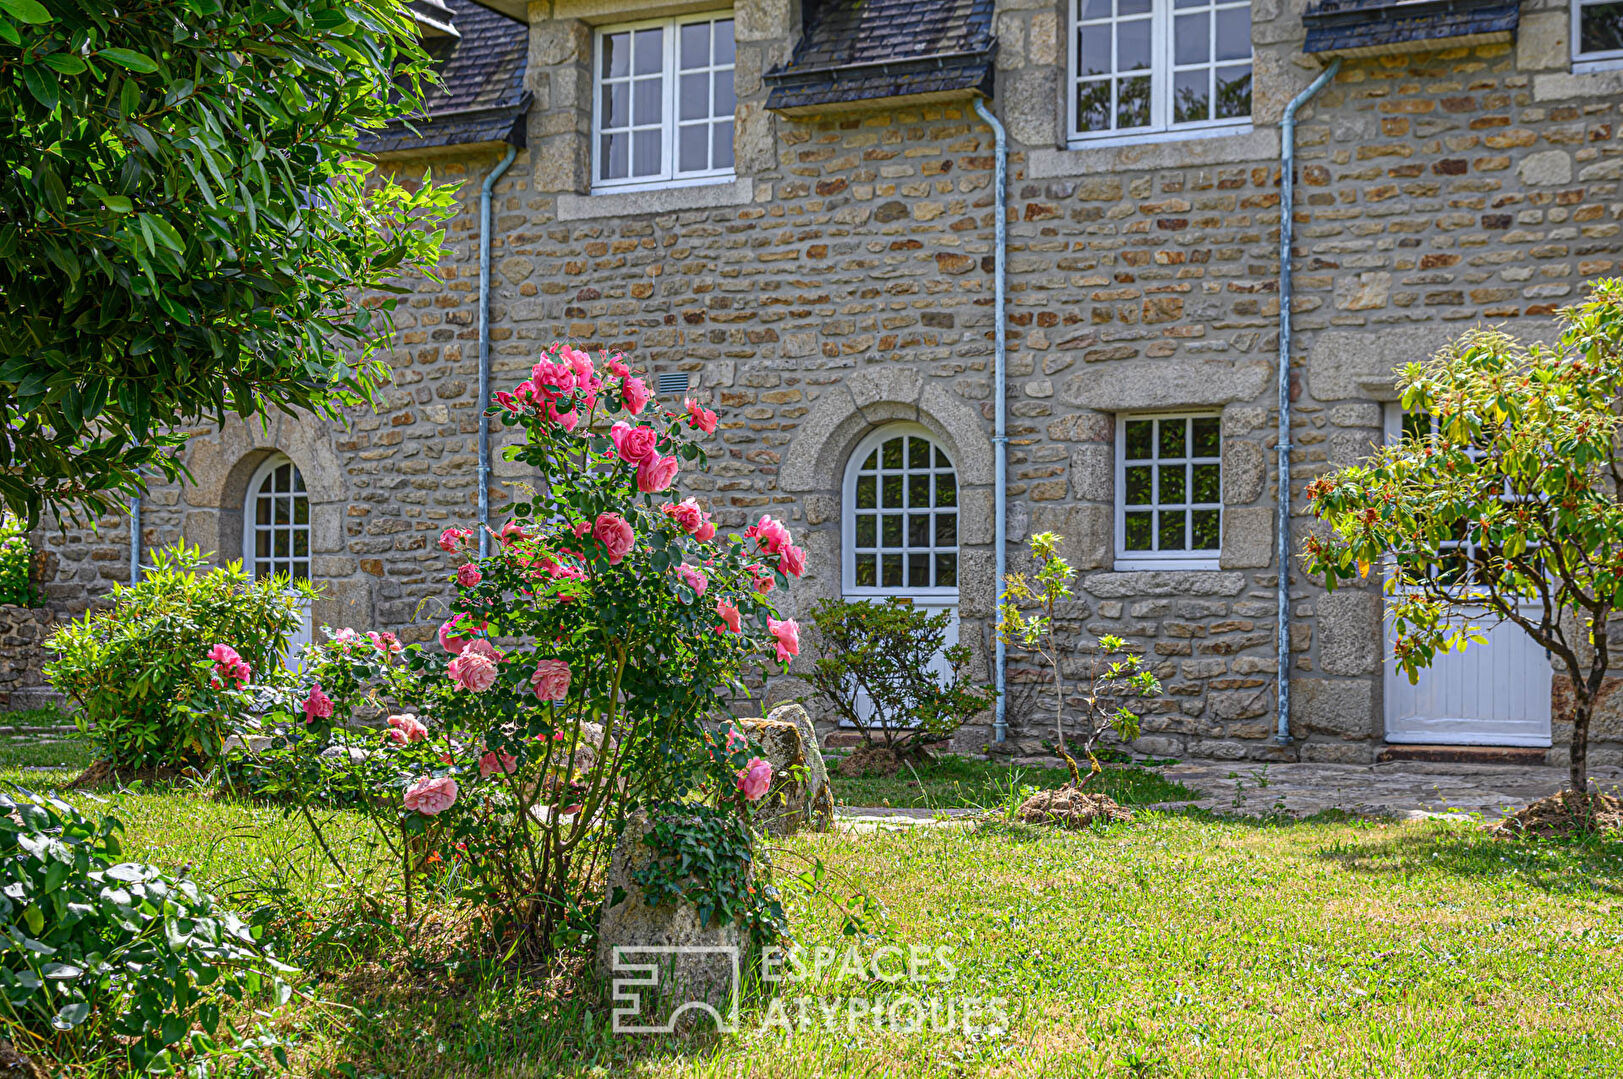 Family property in stone and its cottages